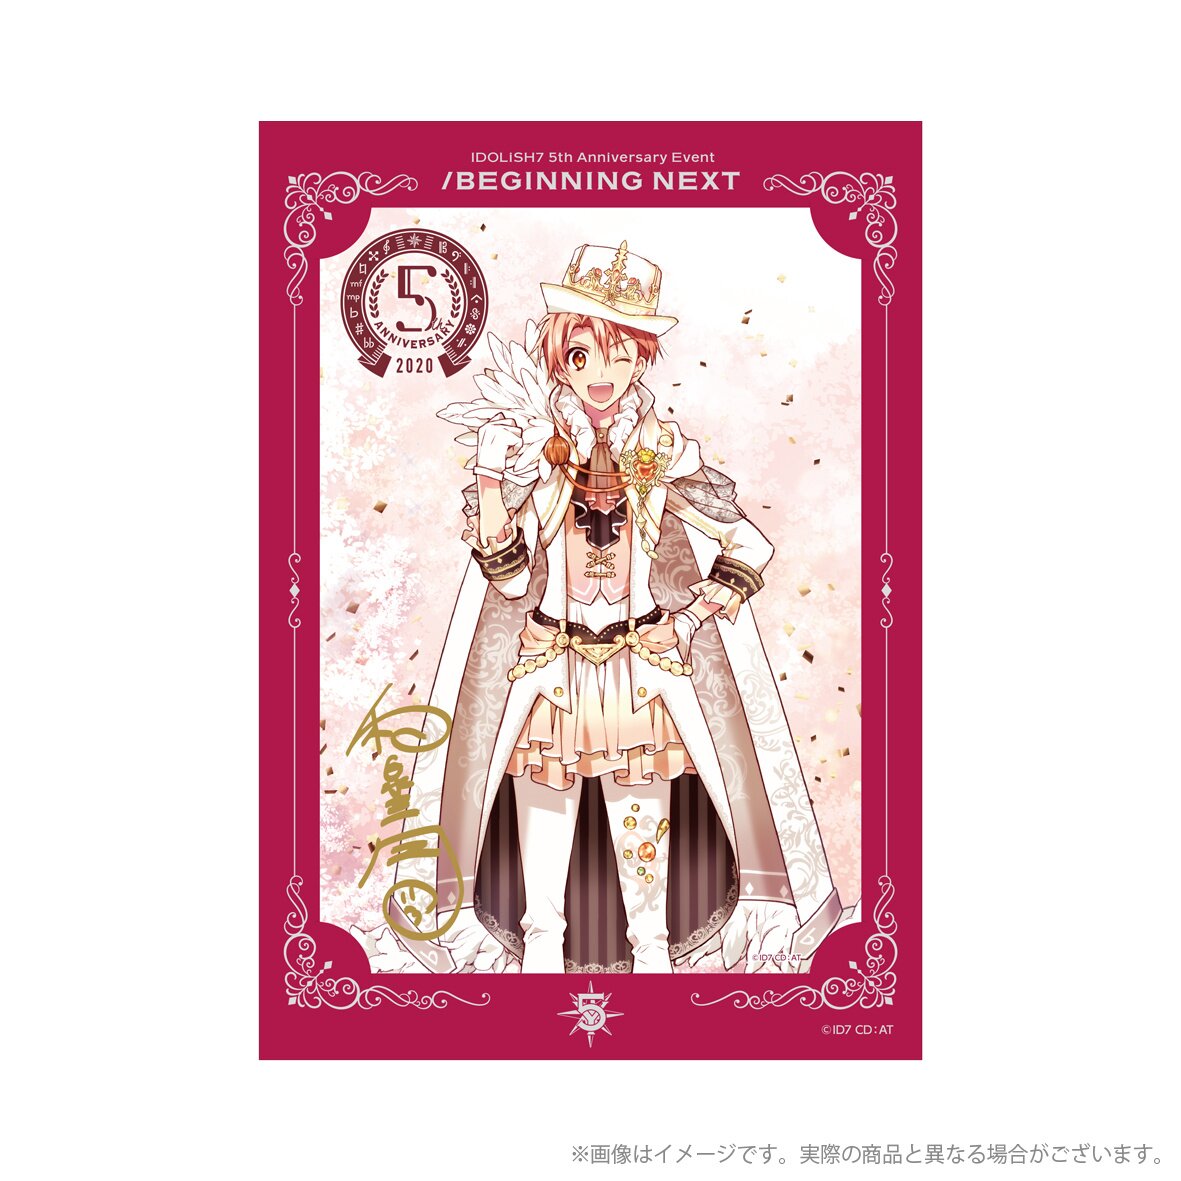 IDOLiSH7 5th Anniversary Event /BEGINNING NEXT Foil Stamped Autograph  Portrait Collection Vol. 1